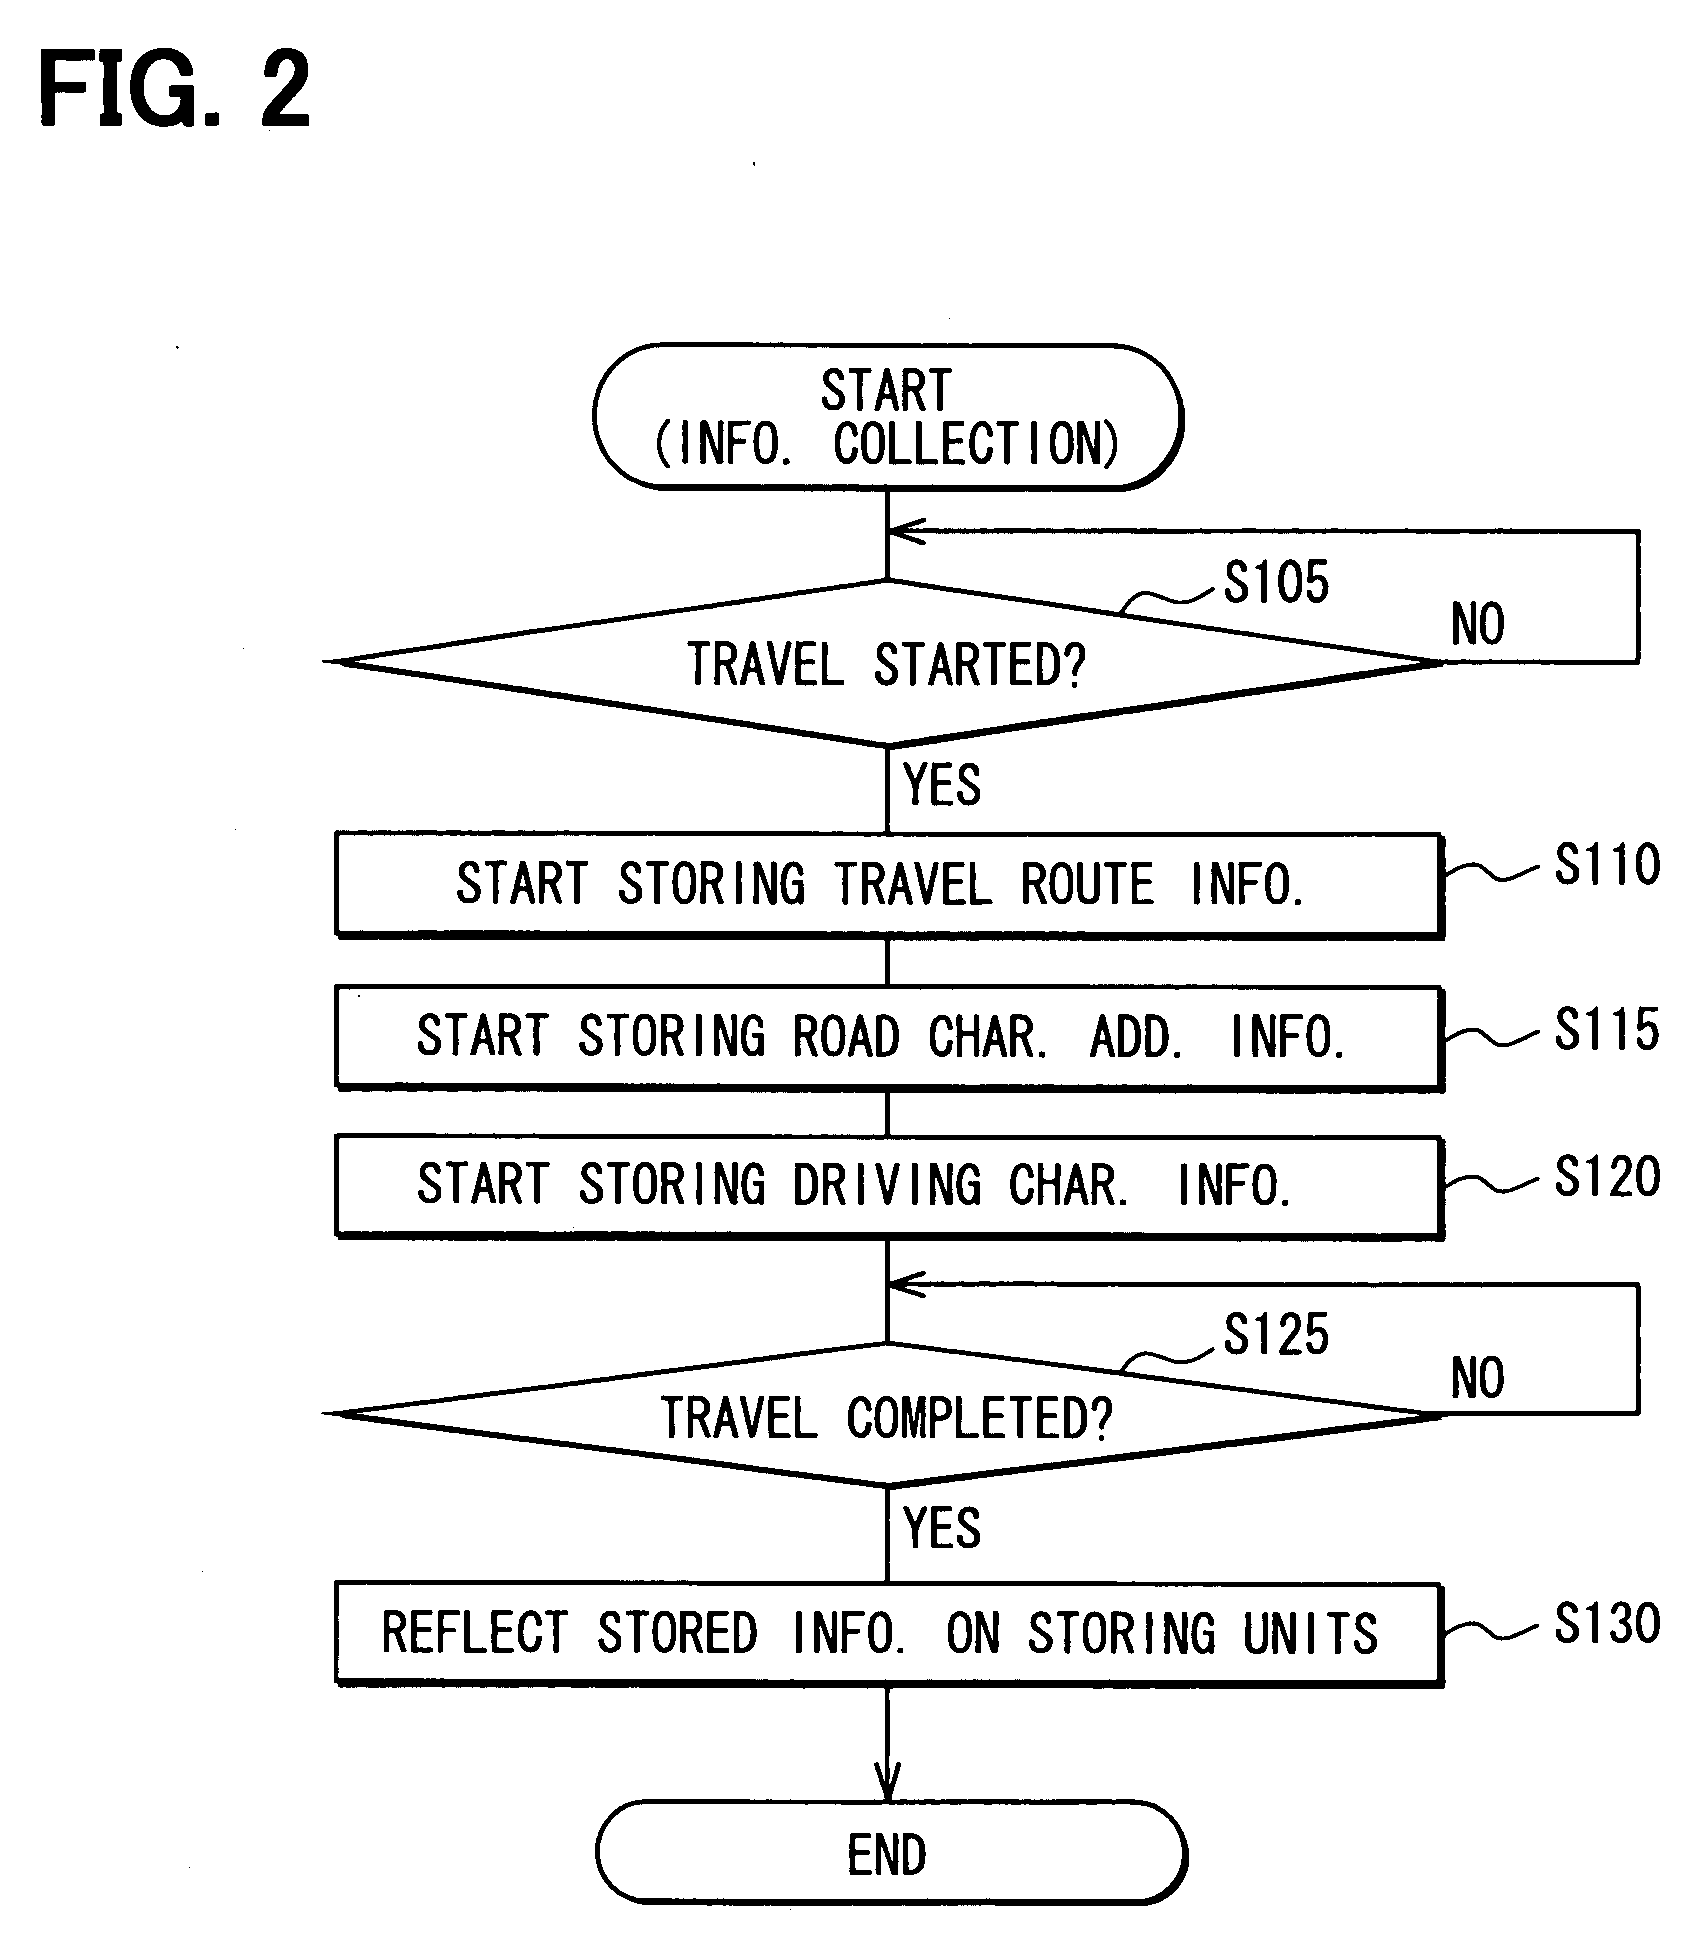 Control information output device